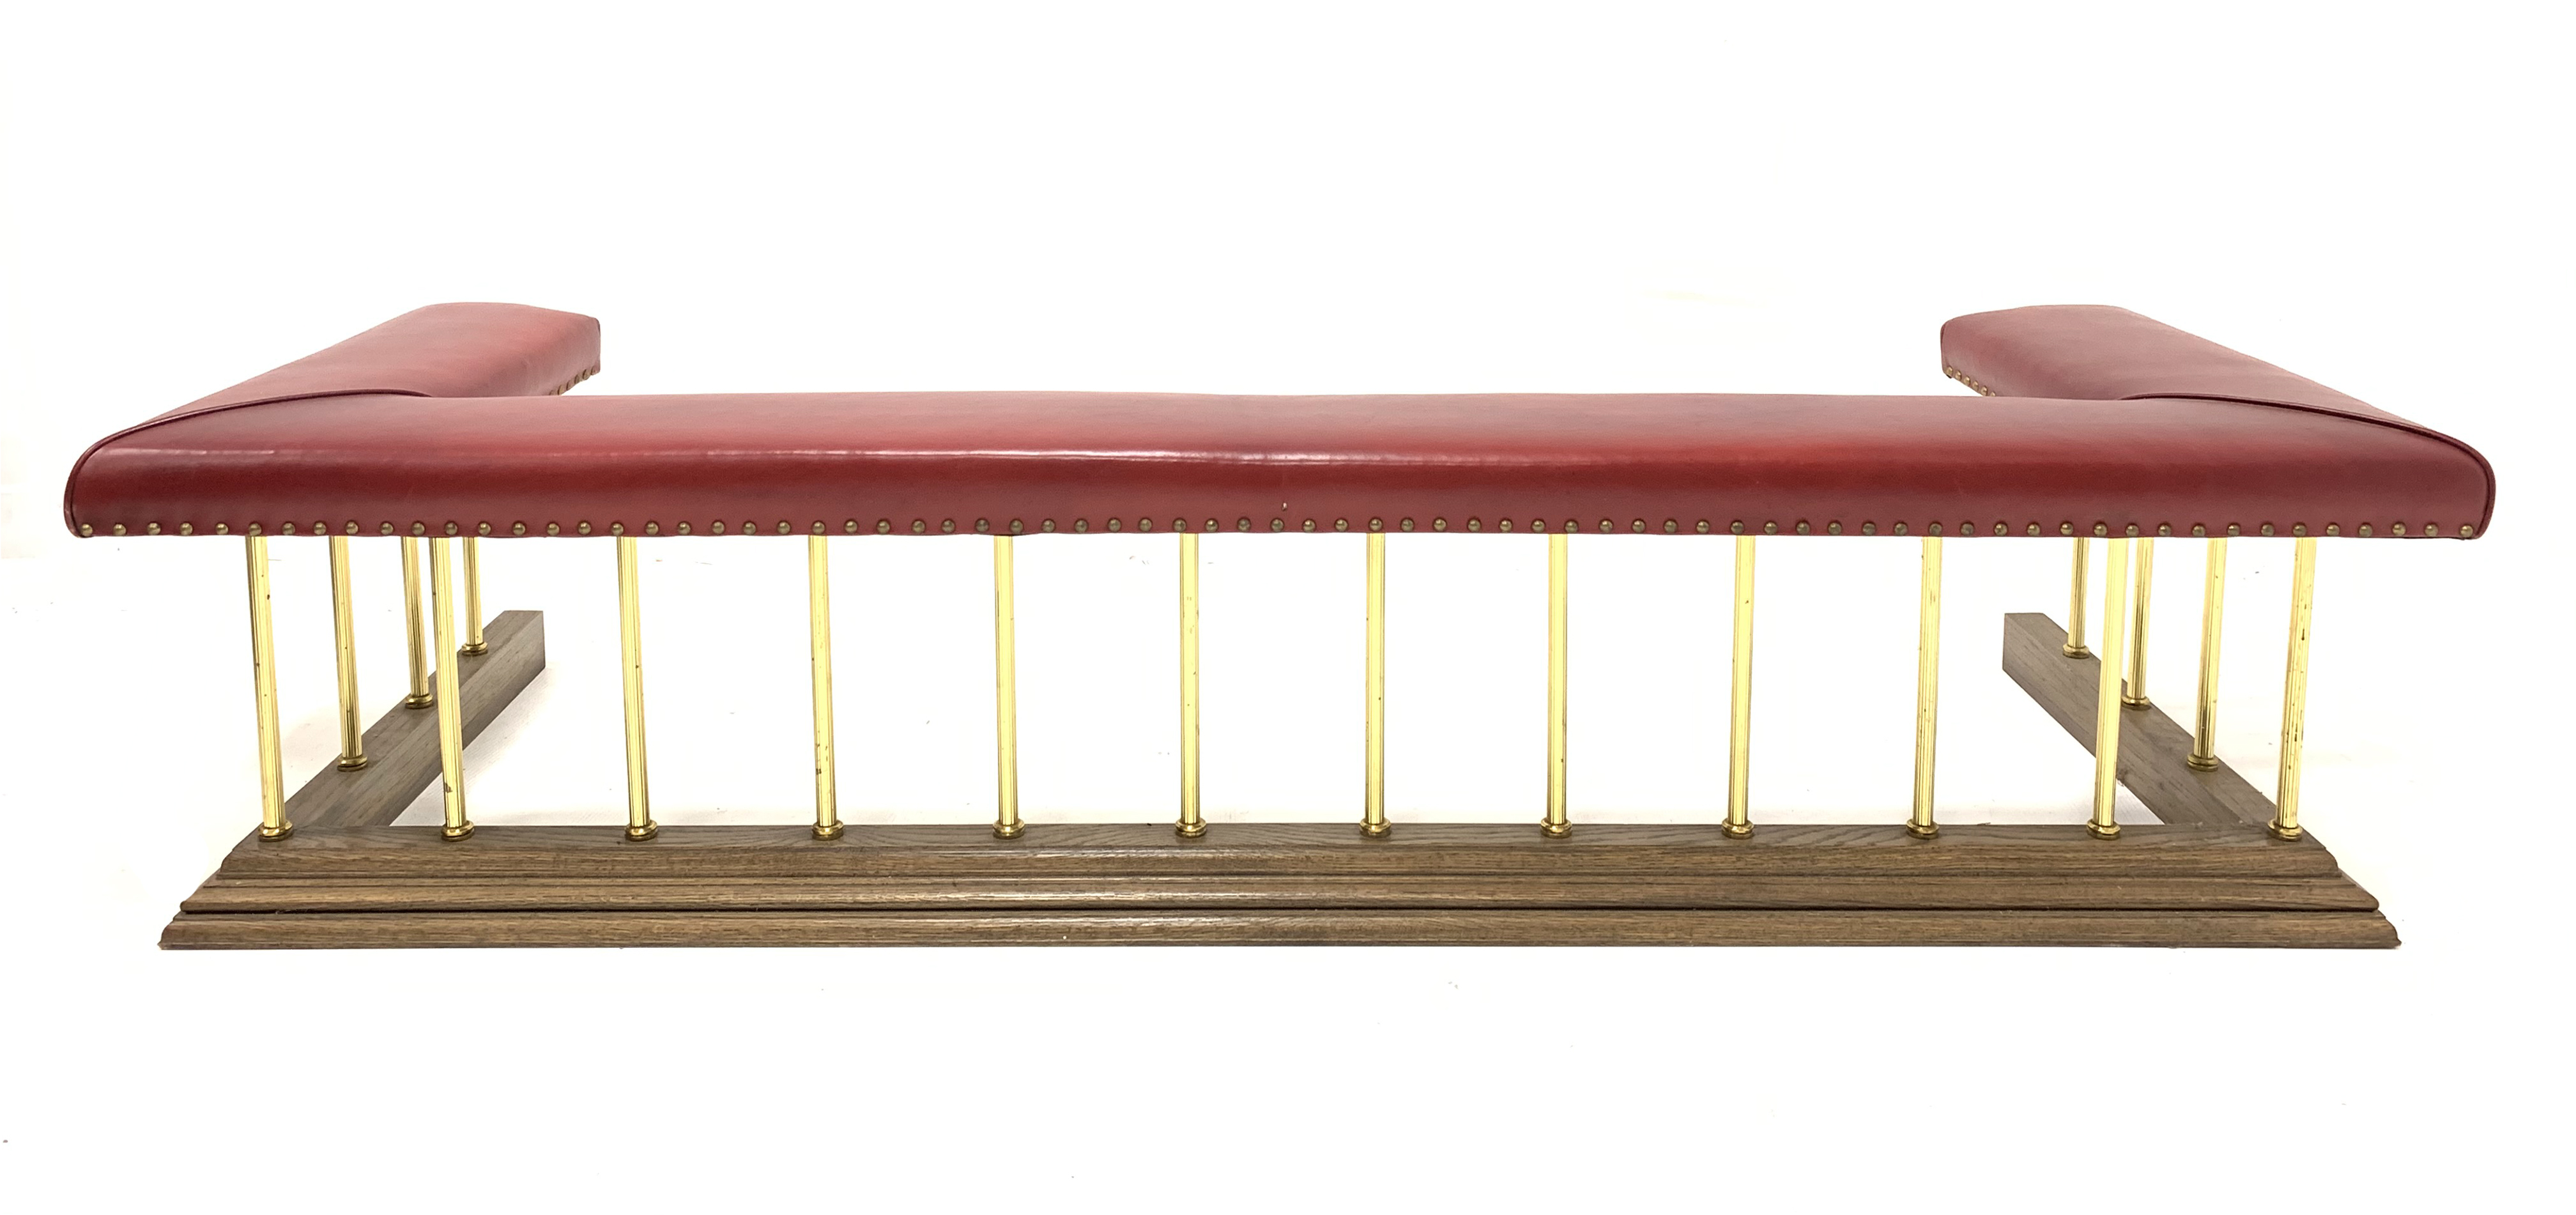 Late 20th century club fender, red studded faux leather upholstered seat raised on reeded brass